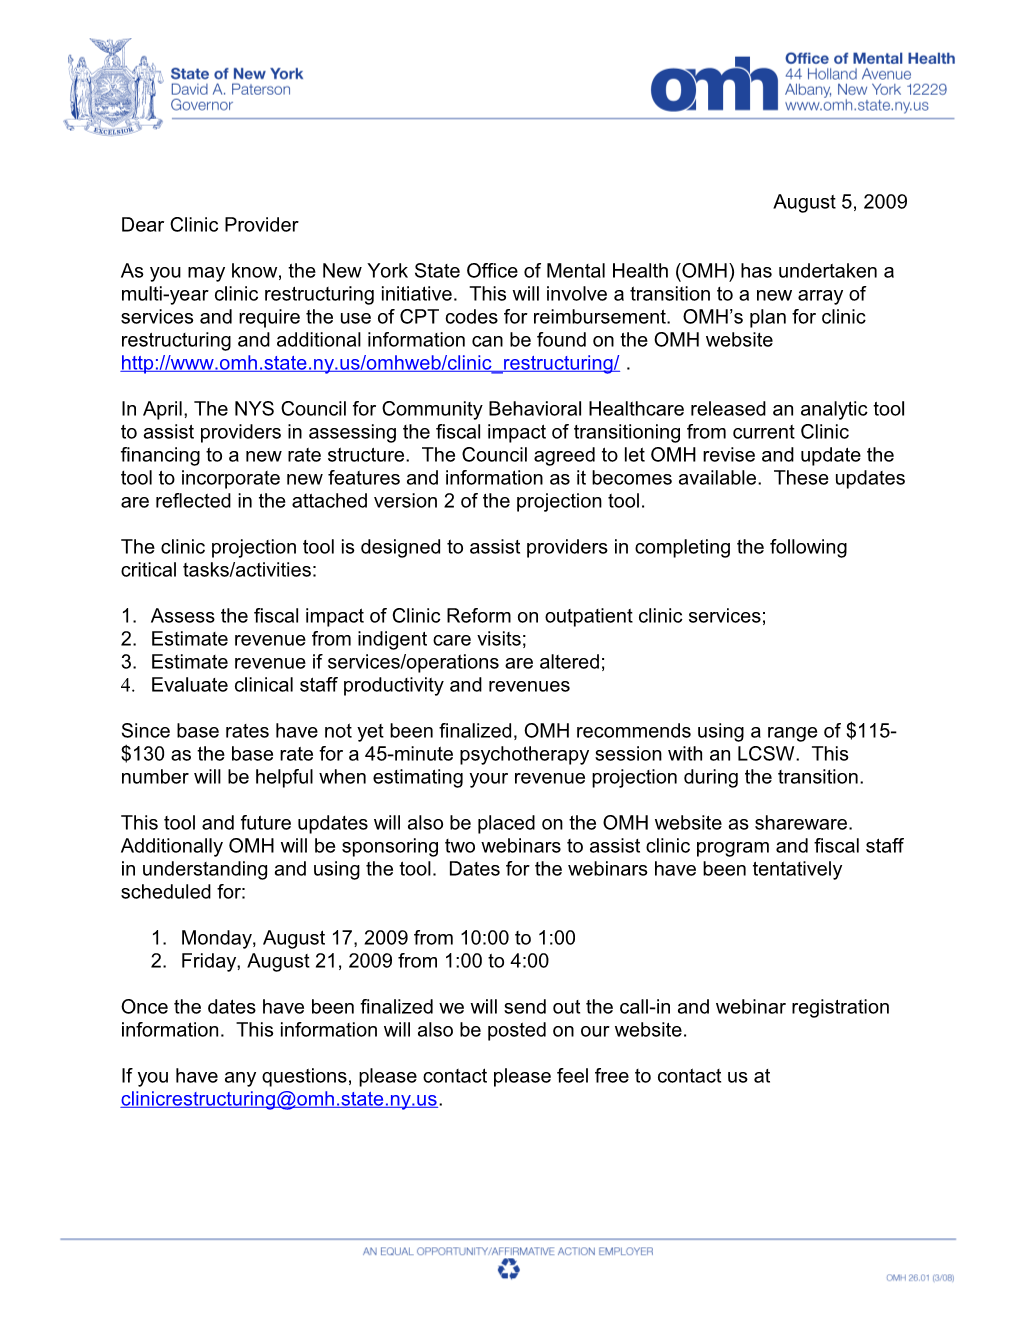 The NYS Council for Community Behavioral Healthcare Has Released an Outpatient Clinic